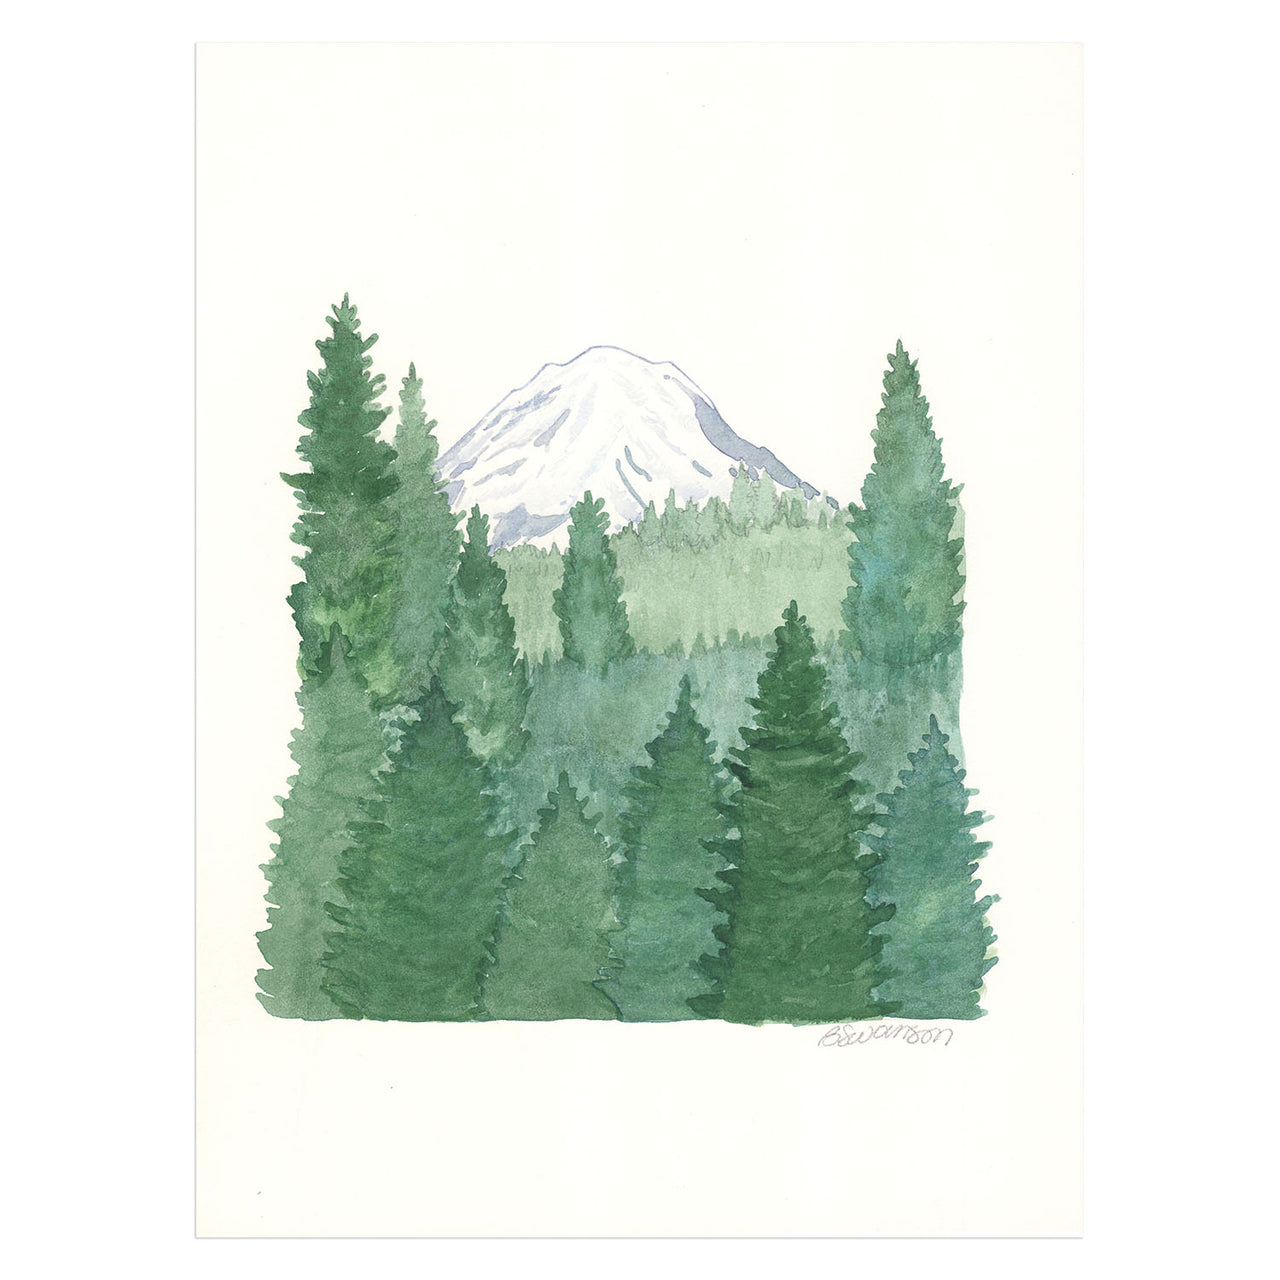 original watercolor painting of Mount Rainier and an evergreen forest